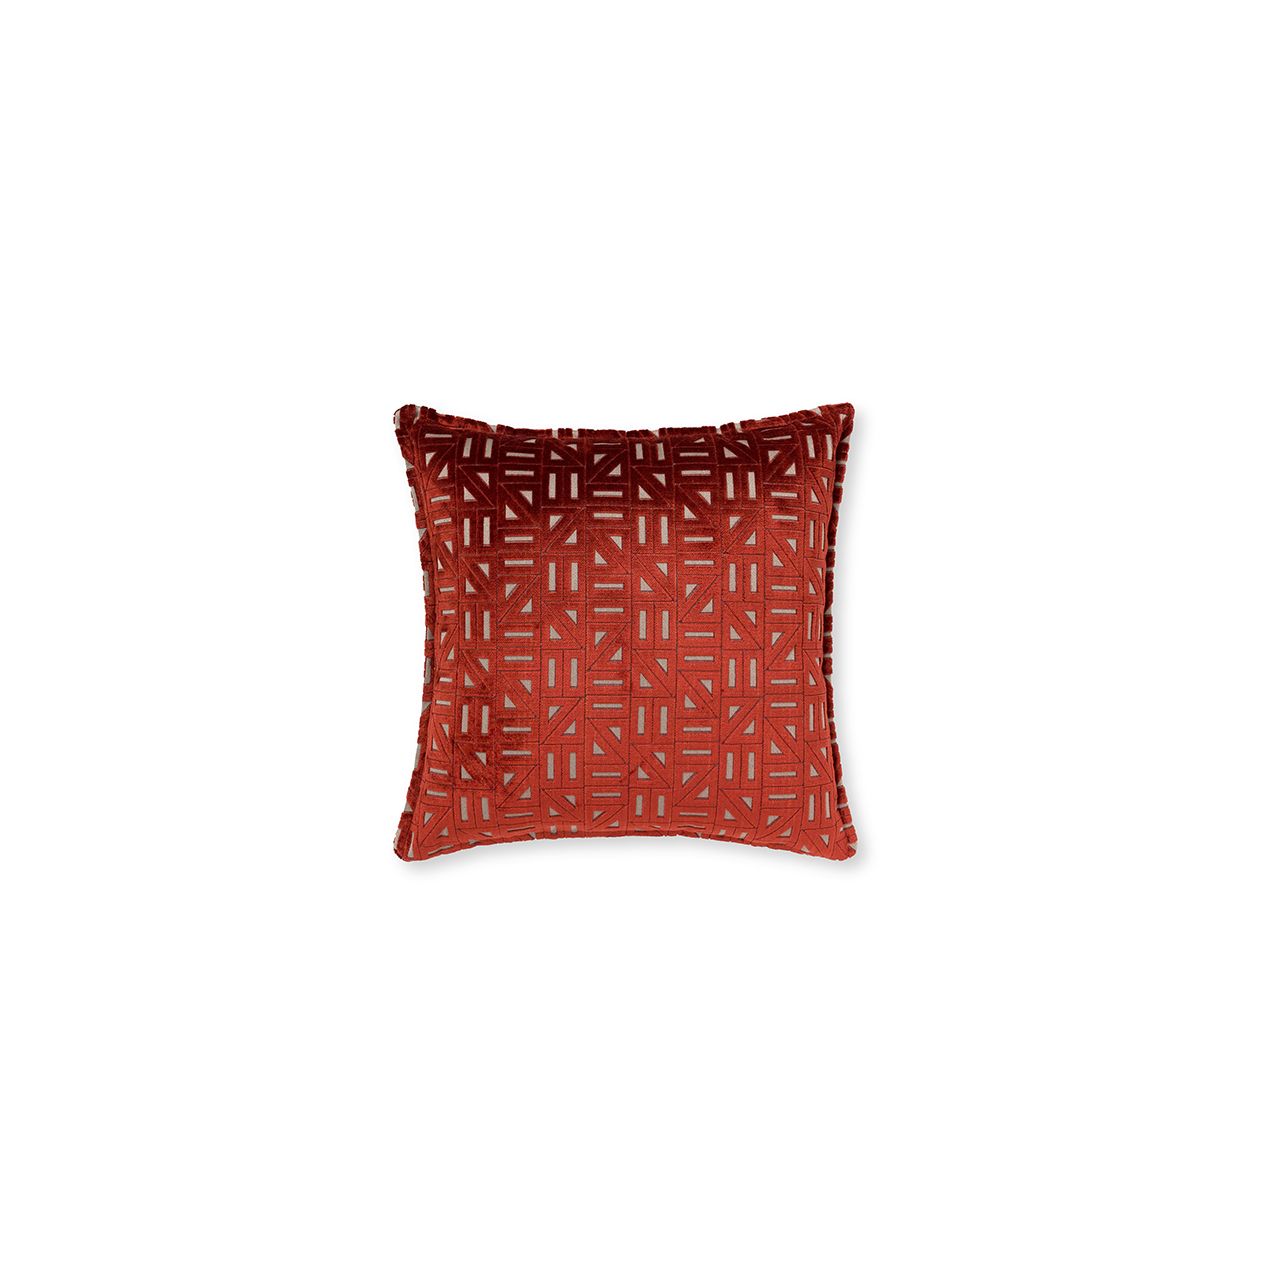 ZELLIGE RED PILLOW